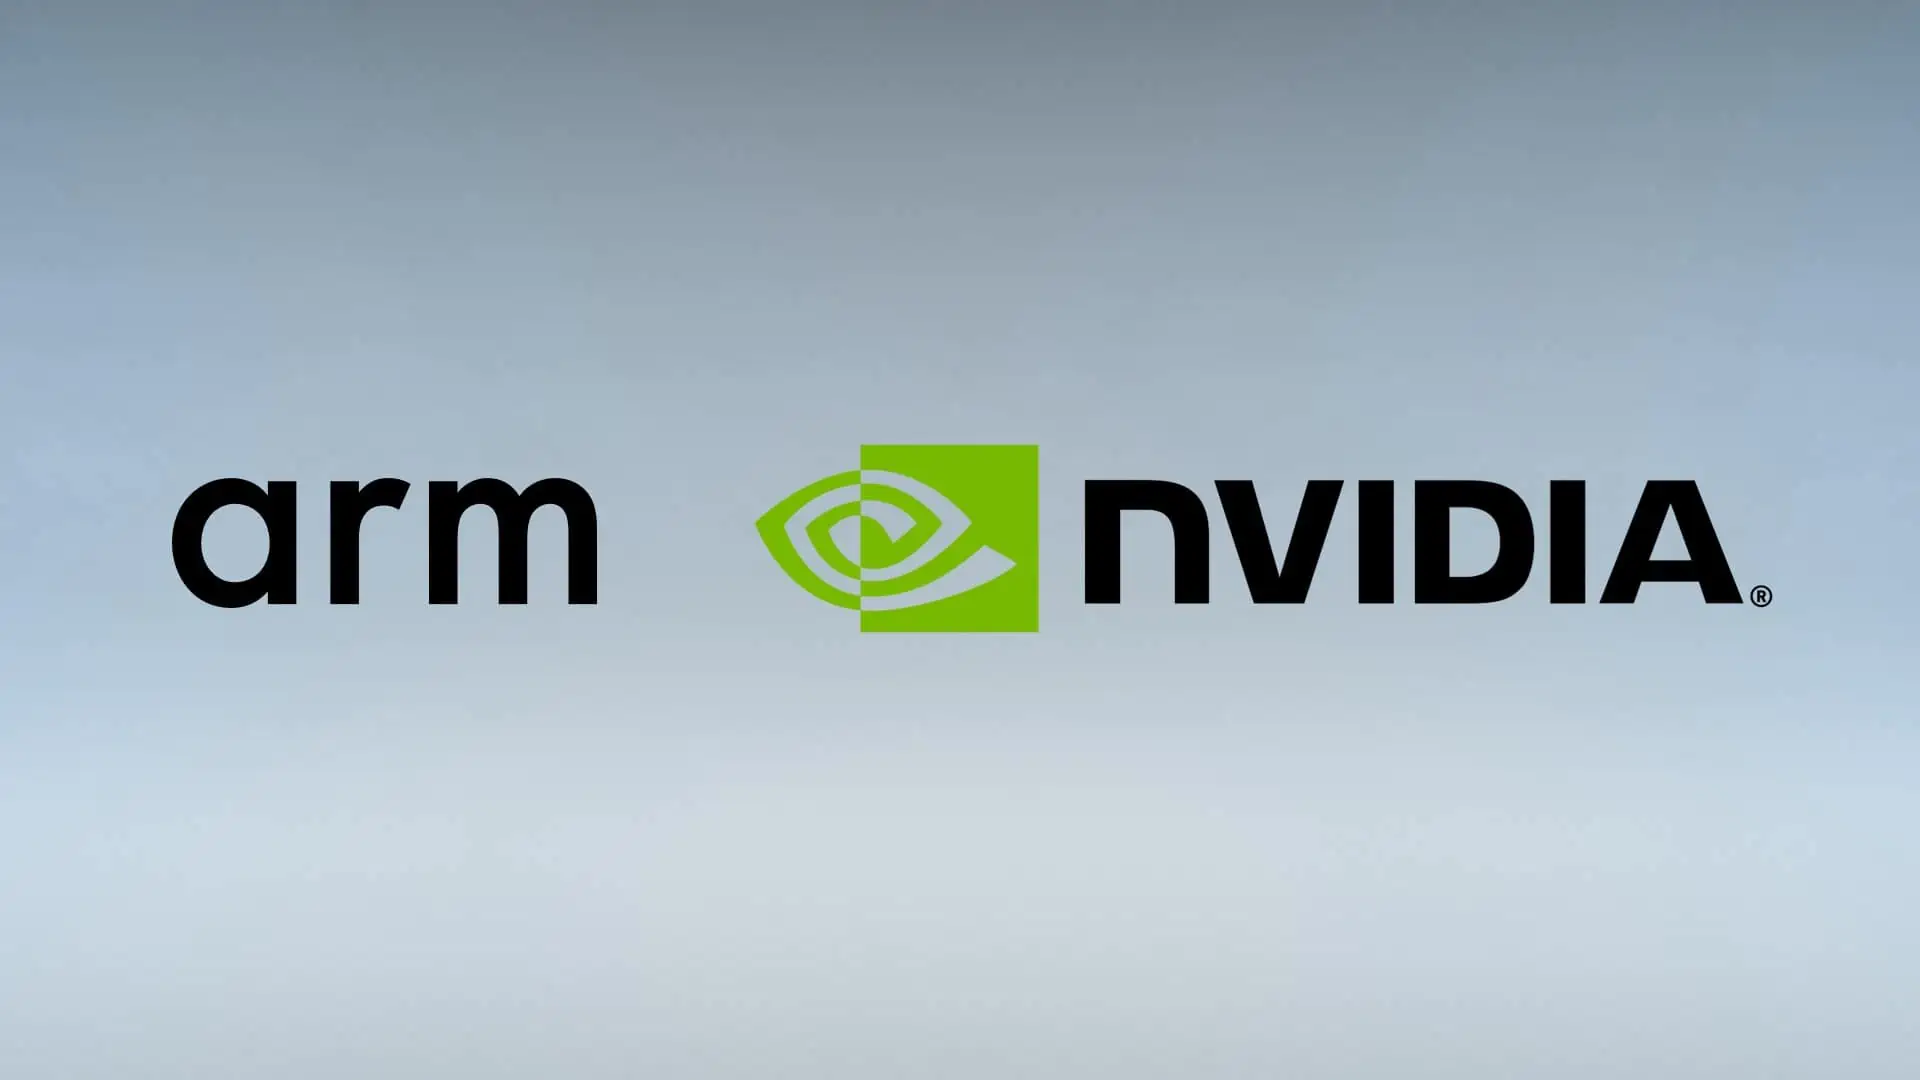 NVIDIA is bringing Real-Time Ray Tracing and DLSS to ARM platform